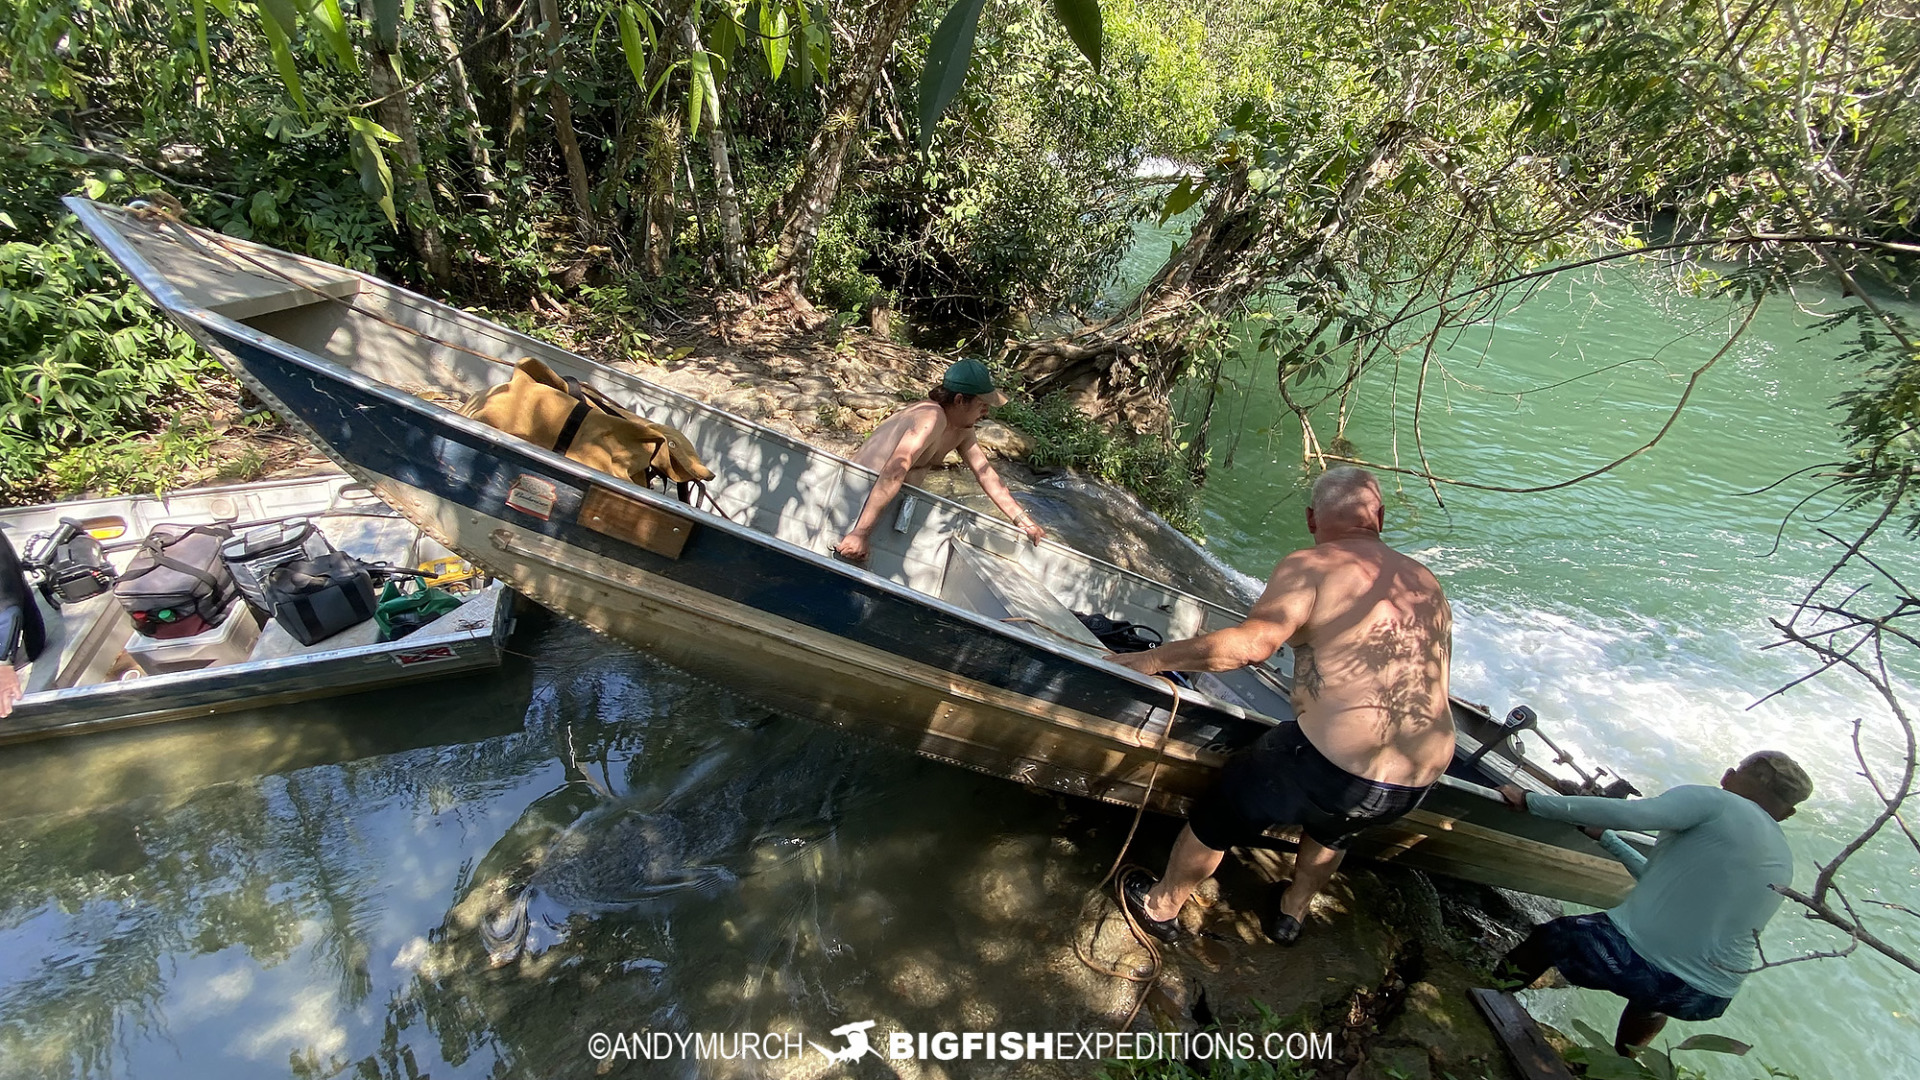 Boat Diving with Anacondas in Brazil.